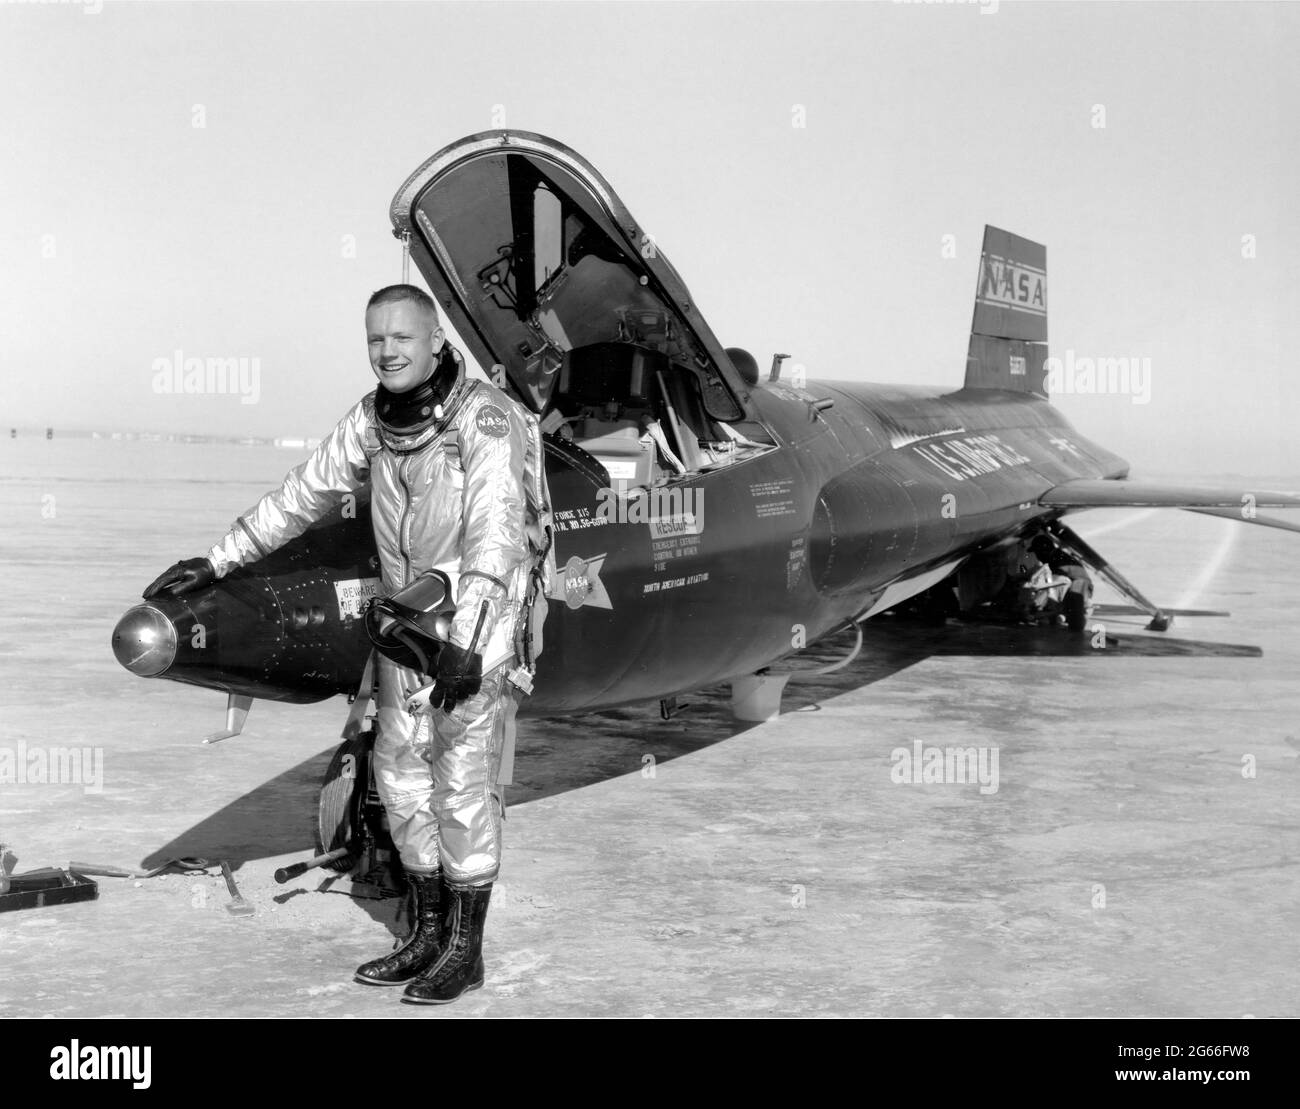 Dryden pilot Neil Armstrong is seen here next to the X-15 ship #1 (56-6670) after a research flight. The X-15 was a rocket-powered aircraft 50 feet long with a wingspan of 22 feet. It was a missile-shaped vehicle with an unusual wedge-shaped vertical tail, thin stubby wings, and unique side fairings that extended along the side of the fuselage. The X-15 was flown over a period of nearly 10 years, from June 1959 to October 1968. It set the world's unofficial speed and altitude records. Information gained from the highly successful X-15 program. Stock Photo